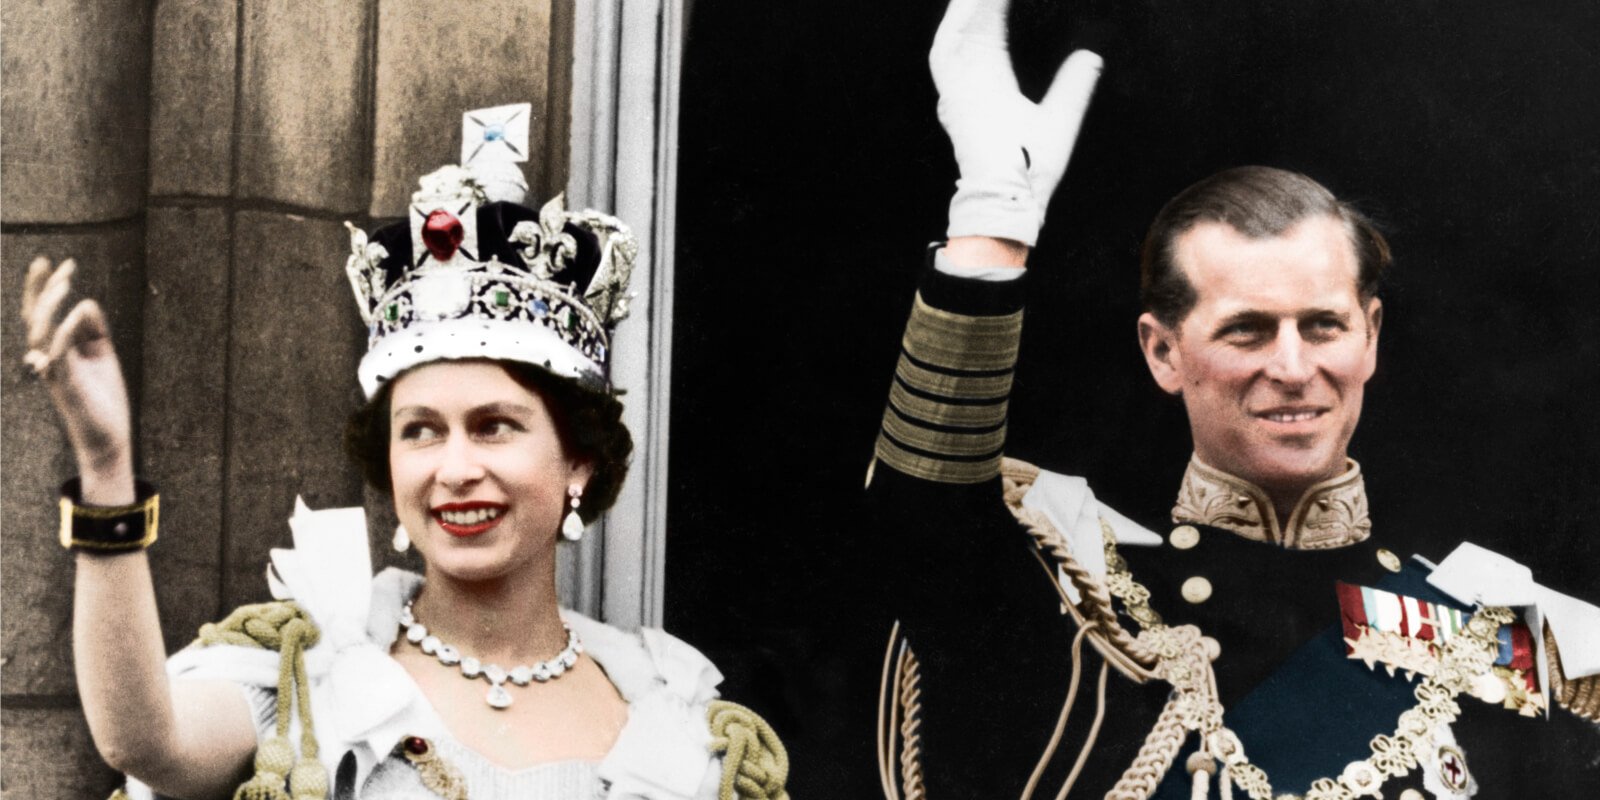 Queen Elizabeth and Prince Philip at her 1953 coronation.